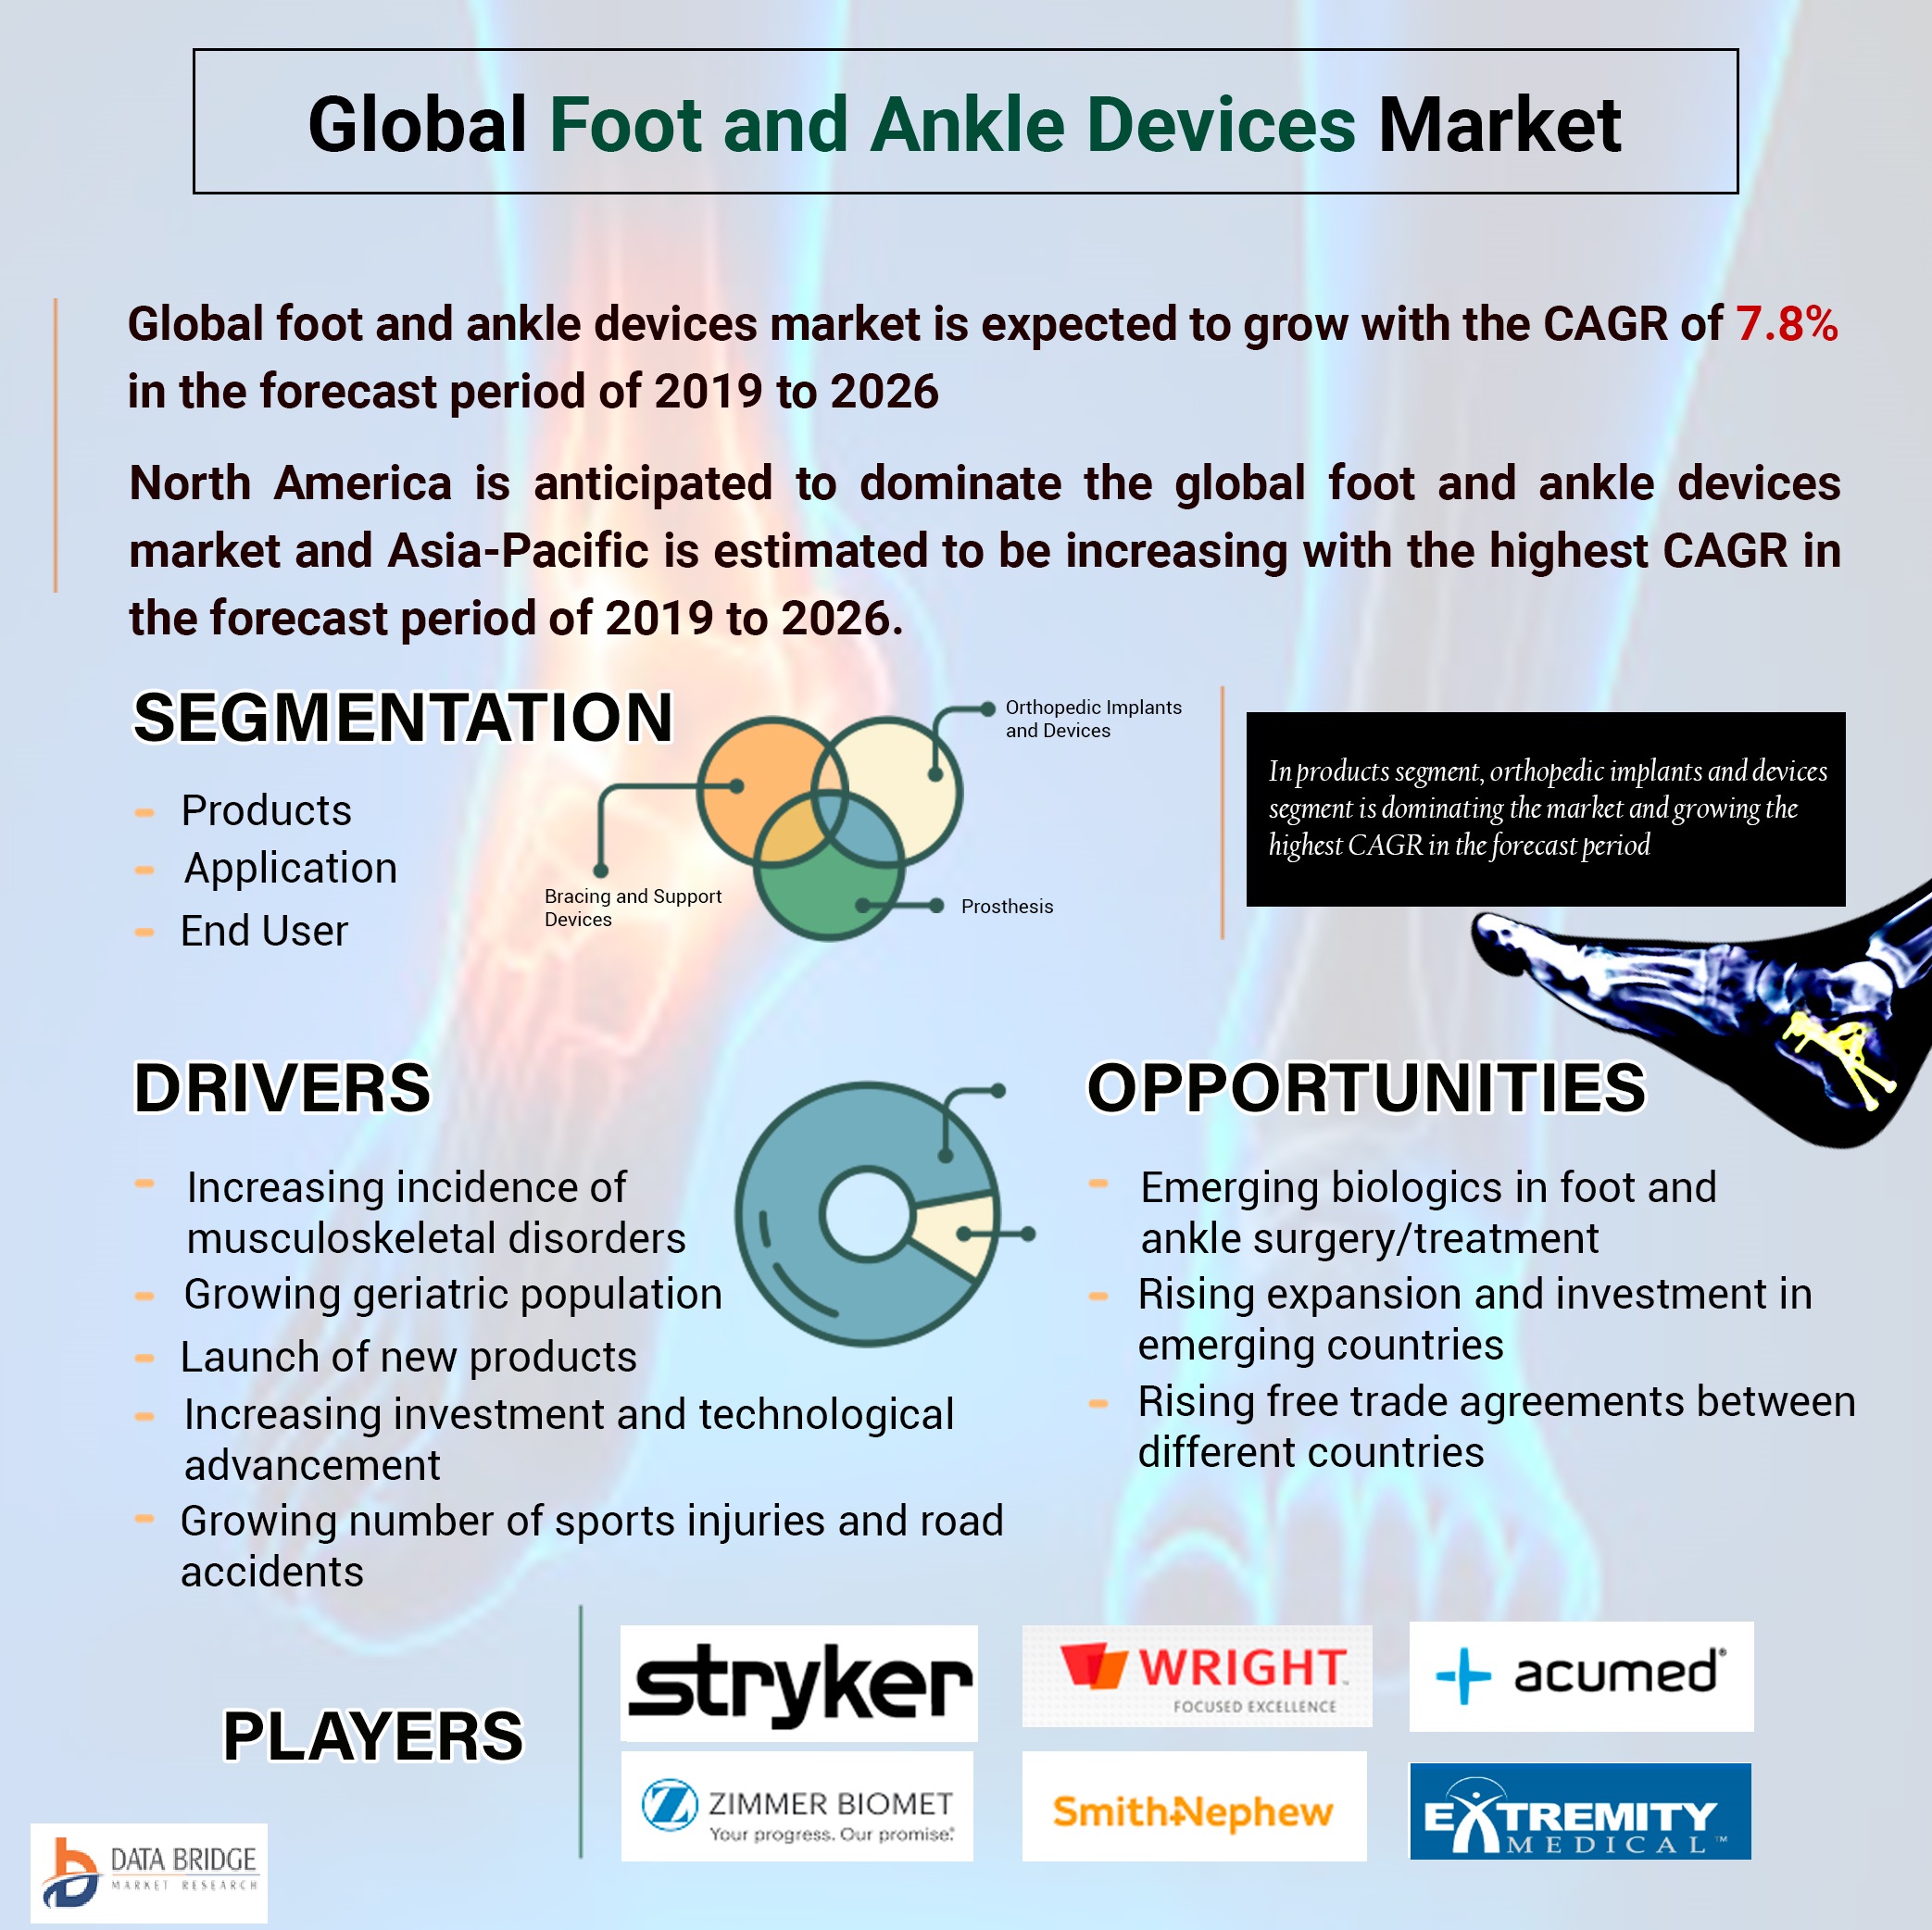 Foot and Ankle Devices Market